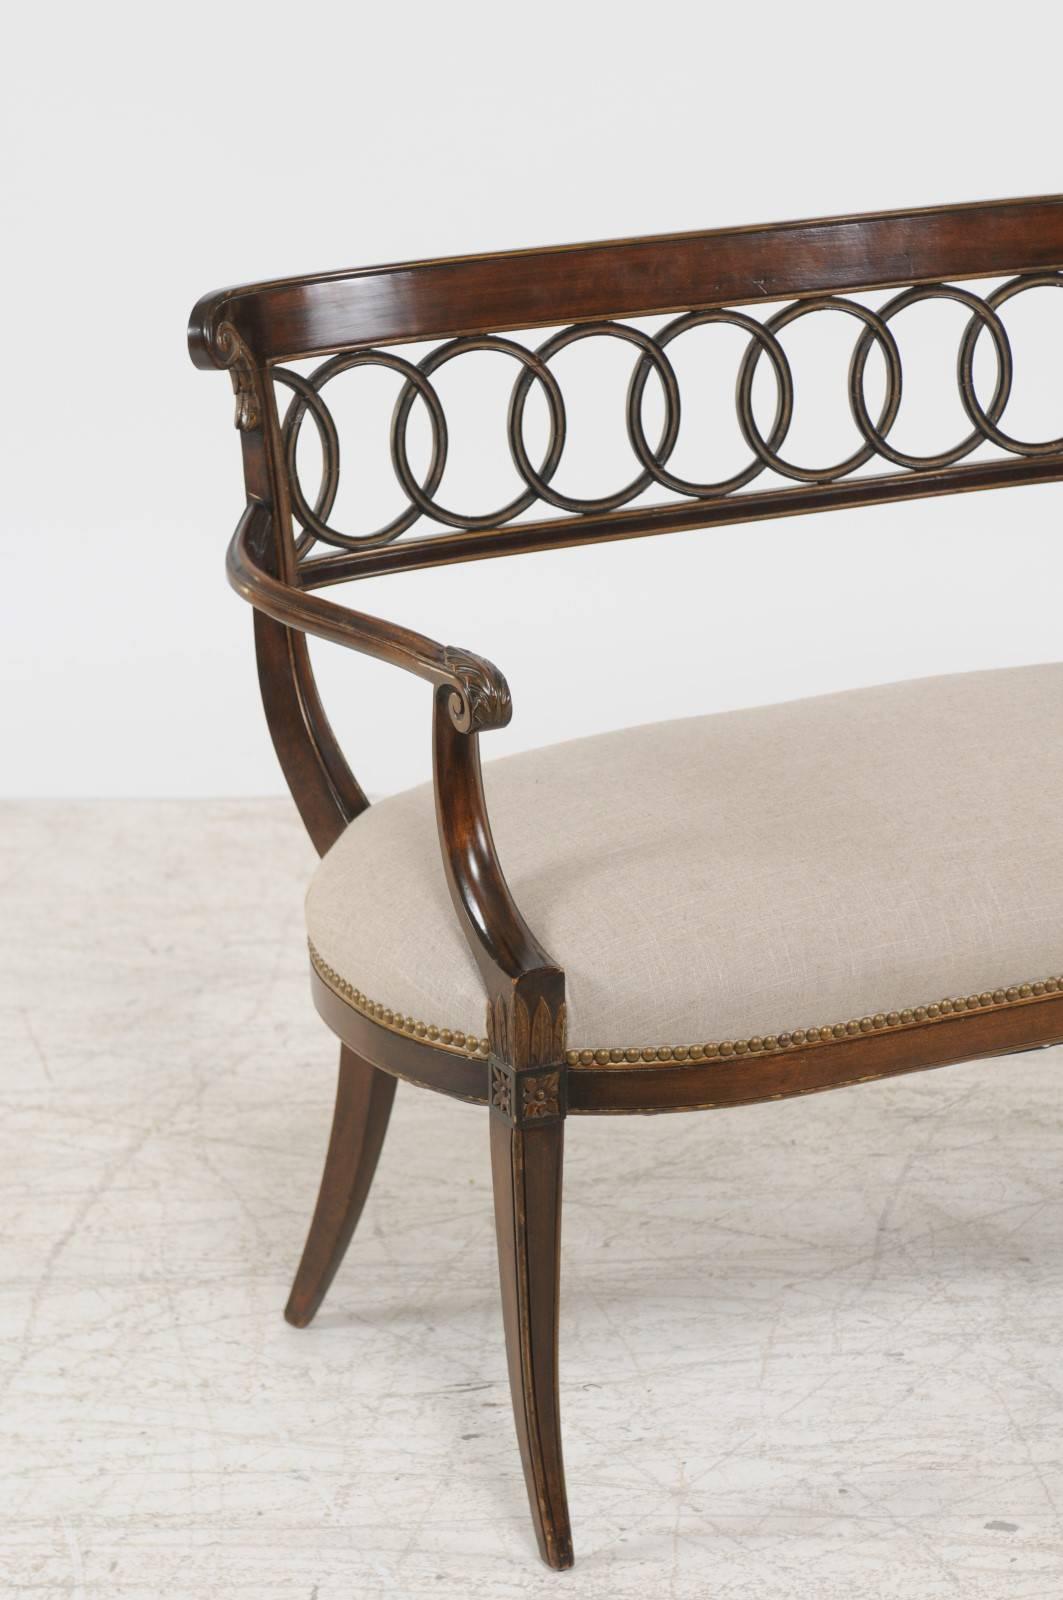 A pair of Italian carved walnut parcel gilt benches with intertwined ring pierced backs, scrolled arms, saber legs and new upholstery. Each of this pair of Italian benches features an exquisite back, delicately curved and carved with eye catching